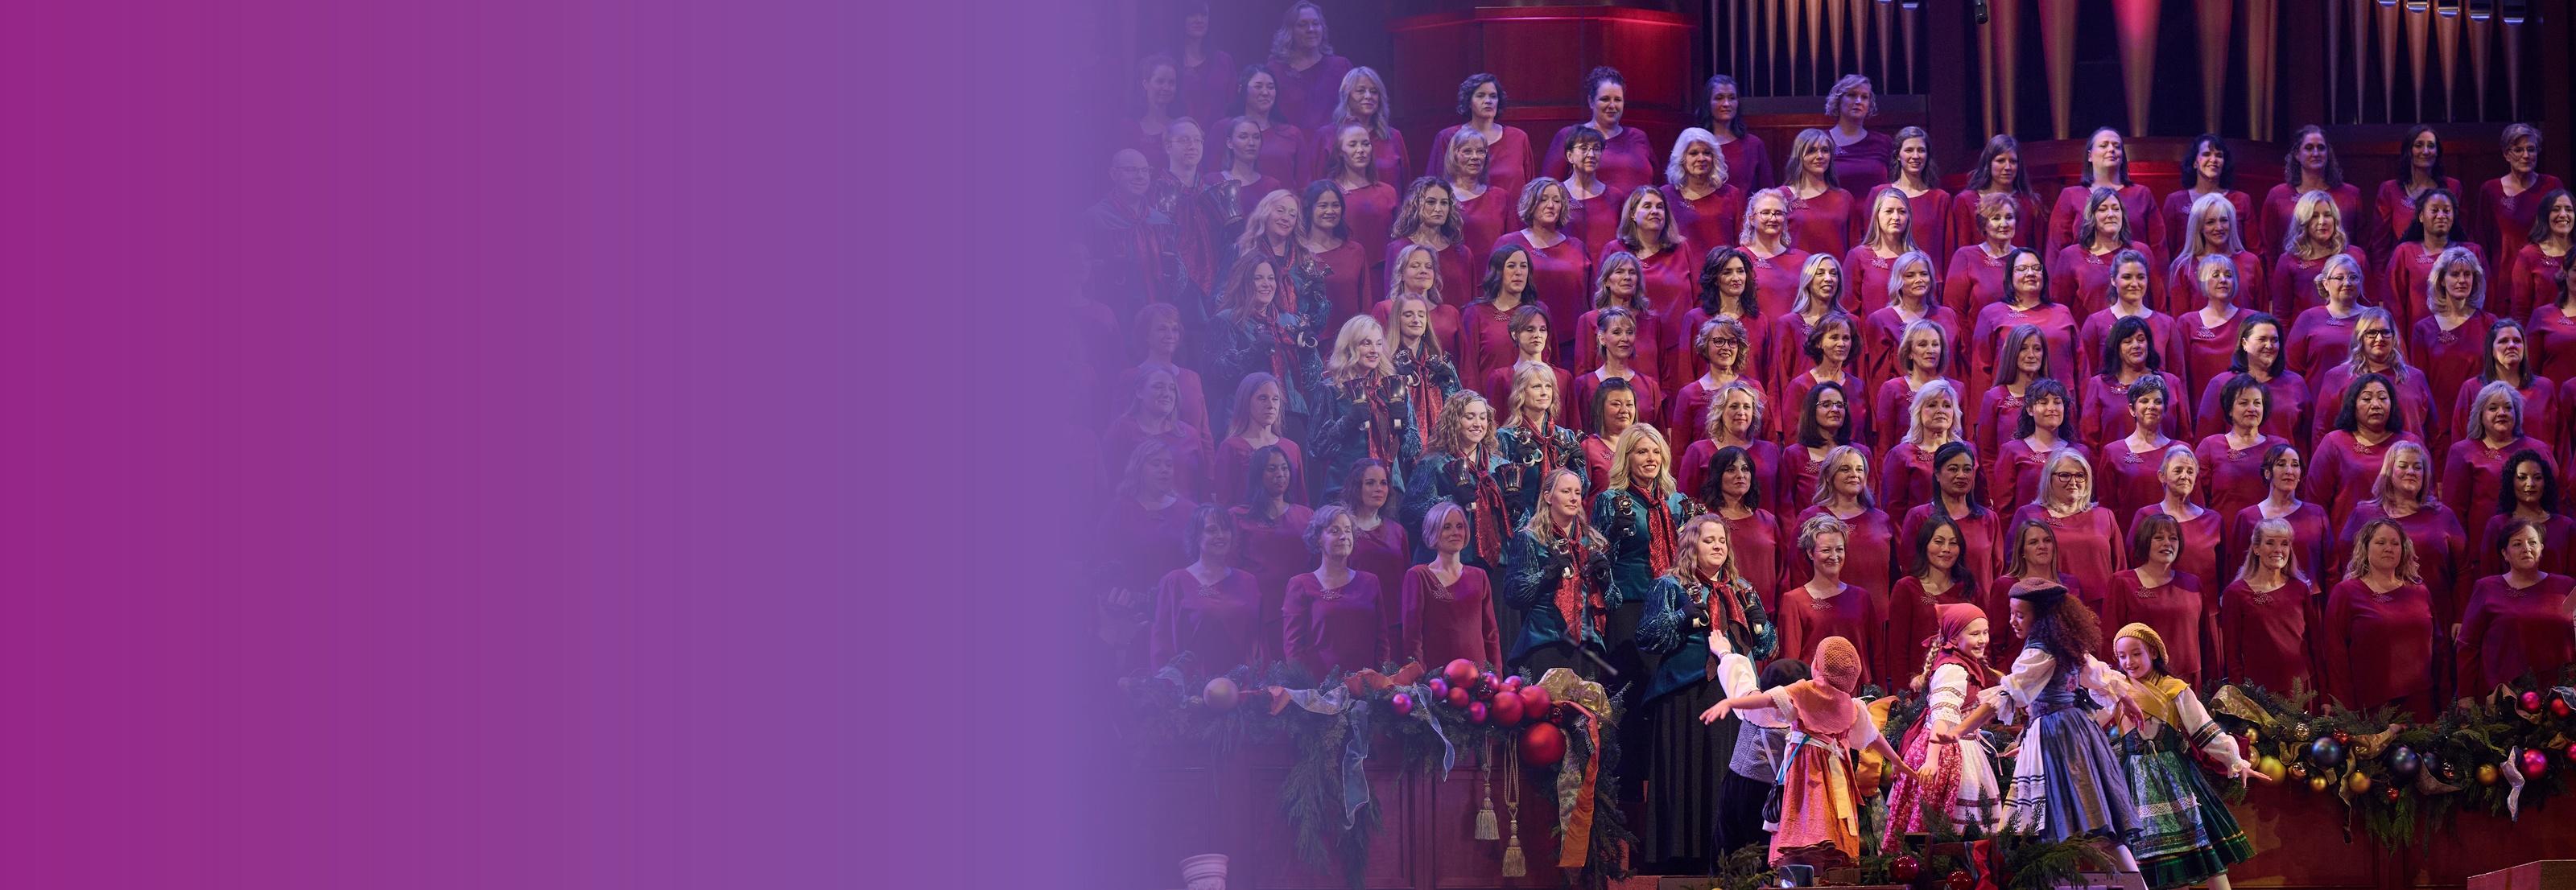 O Holy Night - Christmas with the Tabernacle Choir - Microsoft Apps